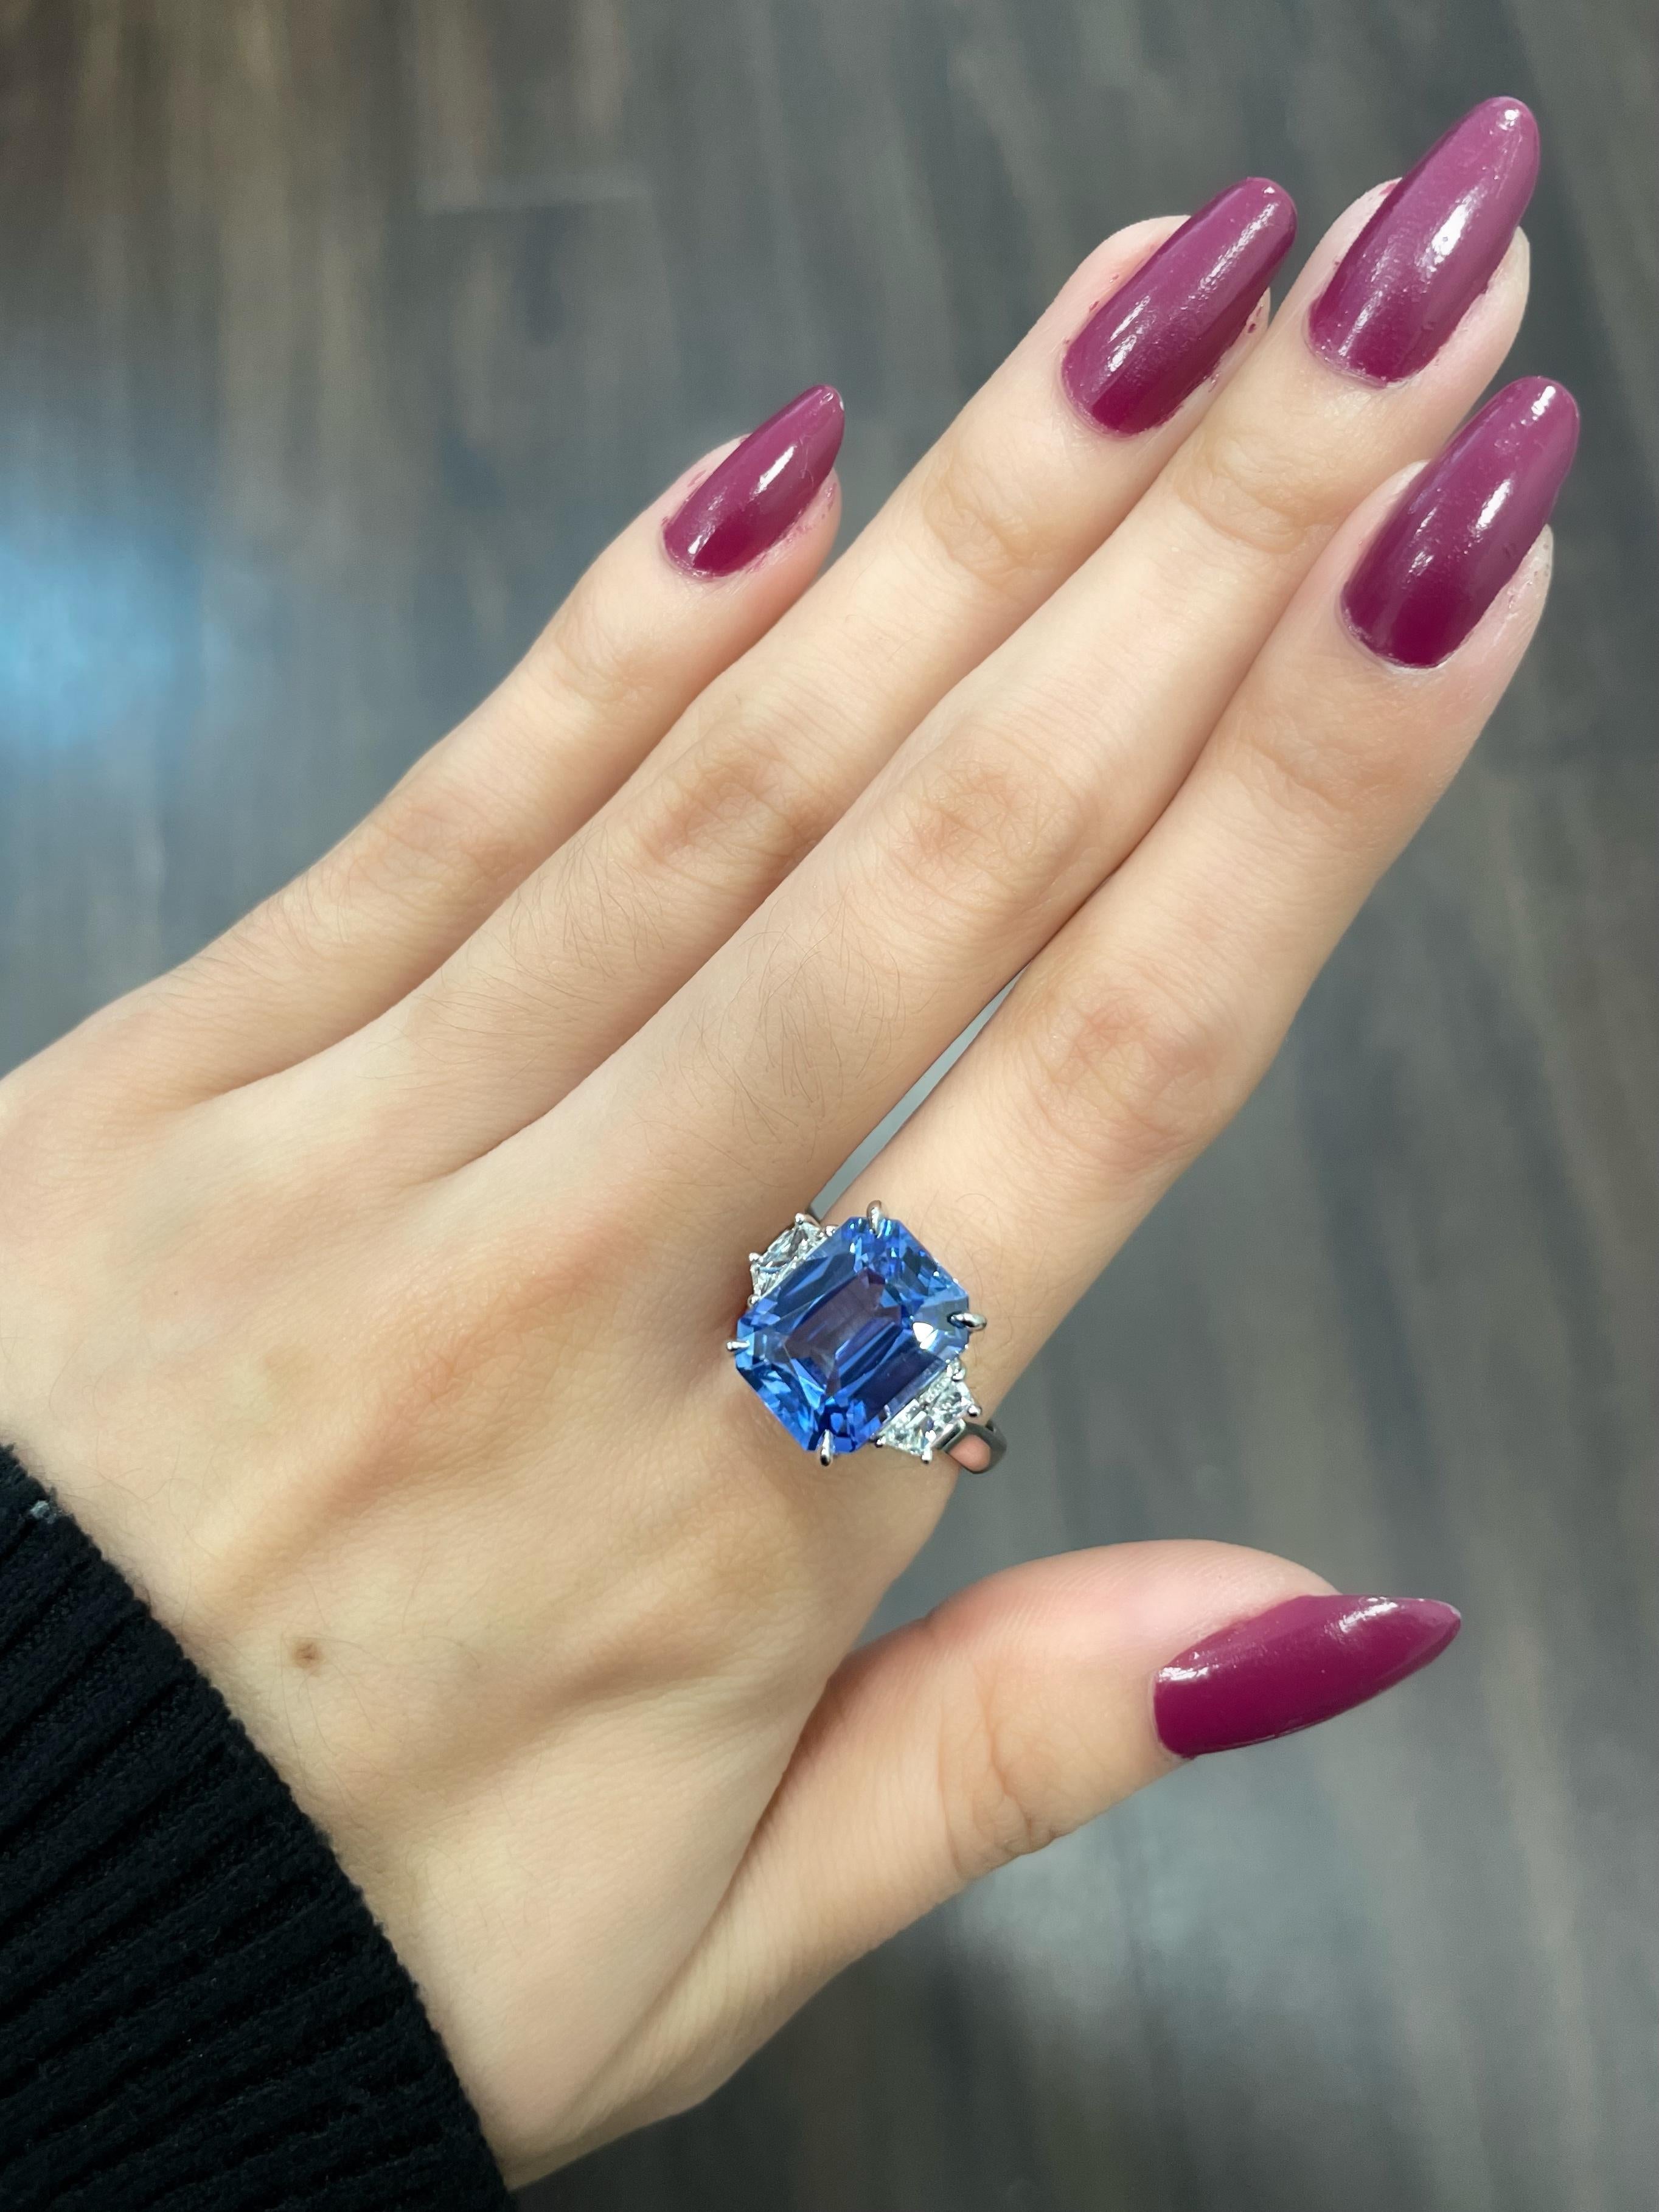 The 7.45 ct Ceylon blue sapphire and diamond ring is a stunning piece of jewelry that will take your breath away. The deep blue color of the sapphire is truly mesmerizing and will catch the eye of anyone who sees it. The sapphire is beautifully